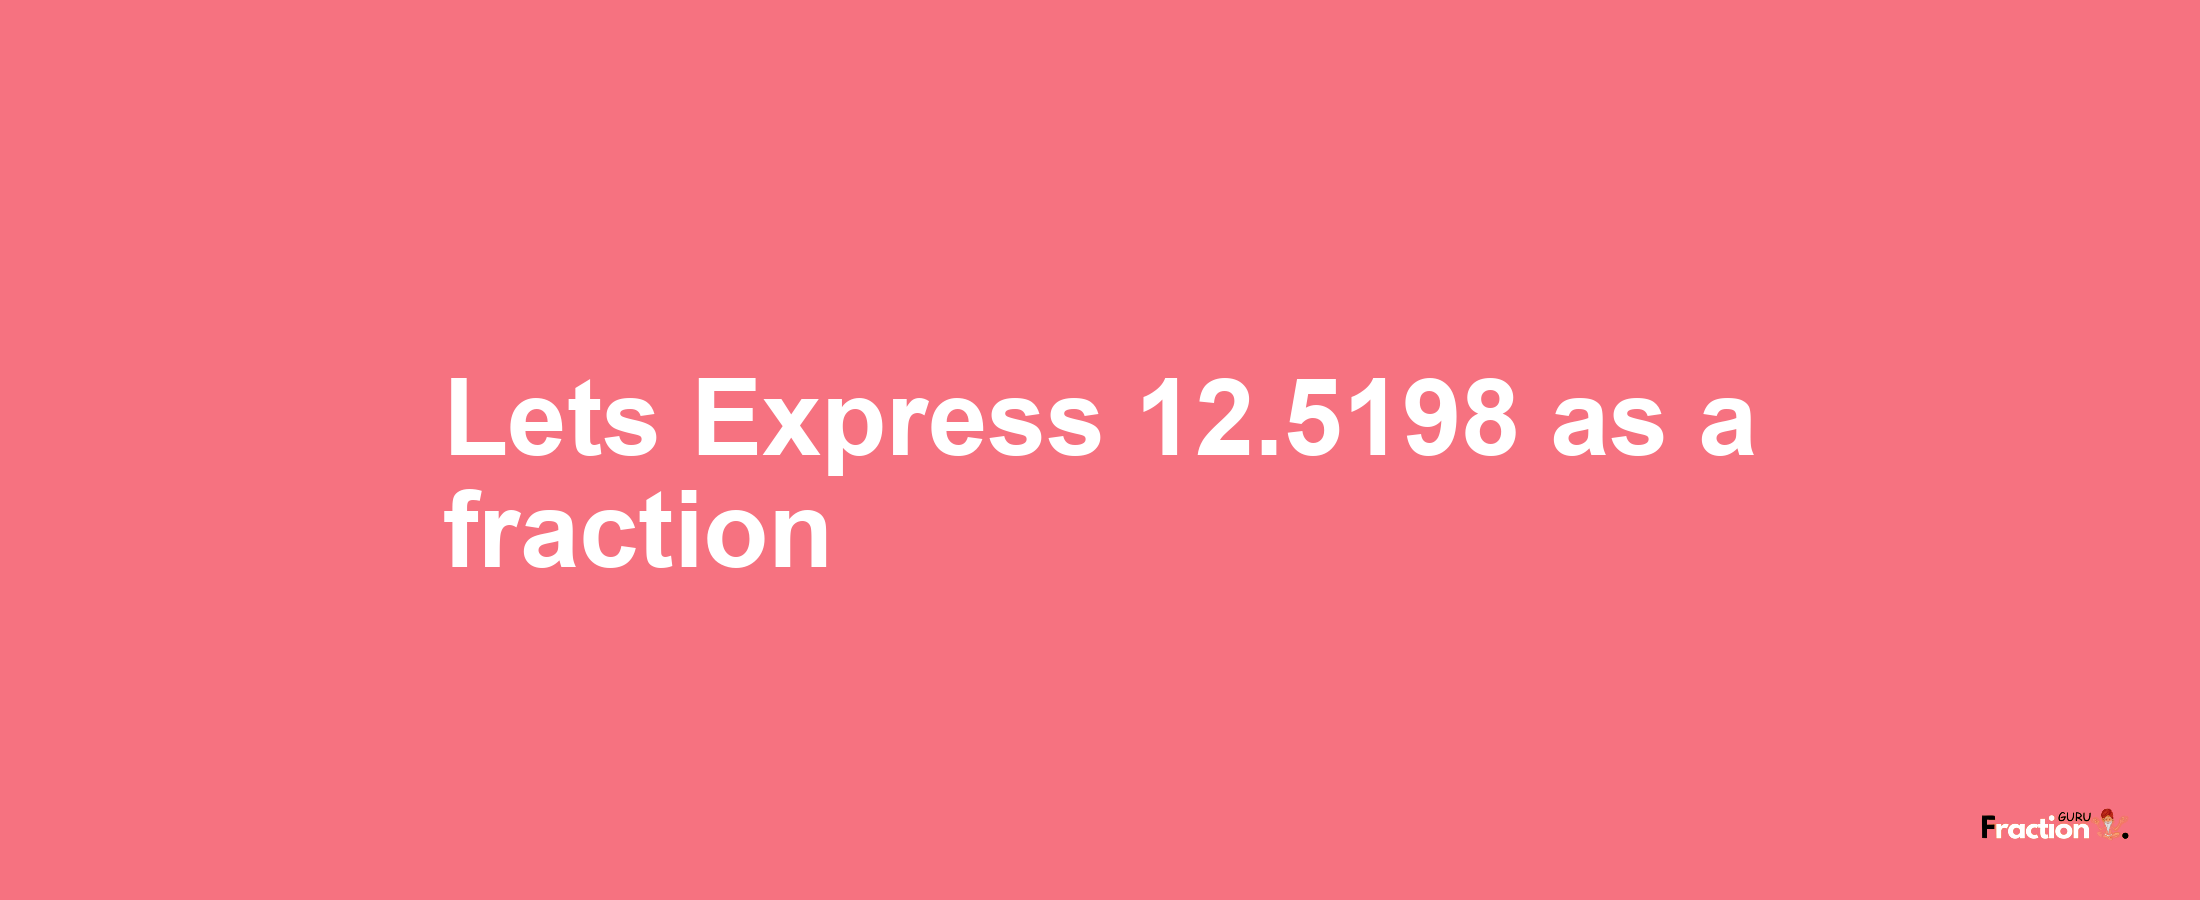 Lets Express 12.5198 as afraction